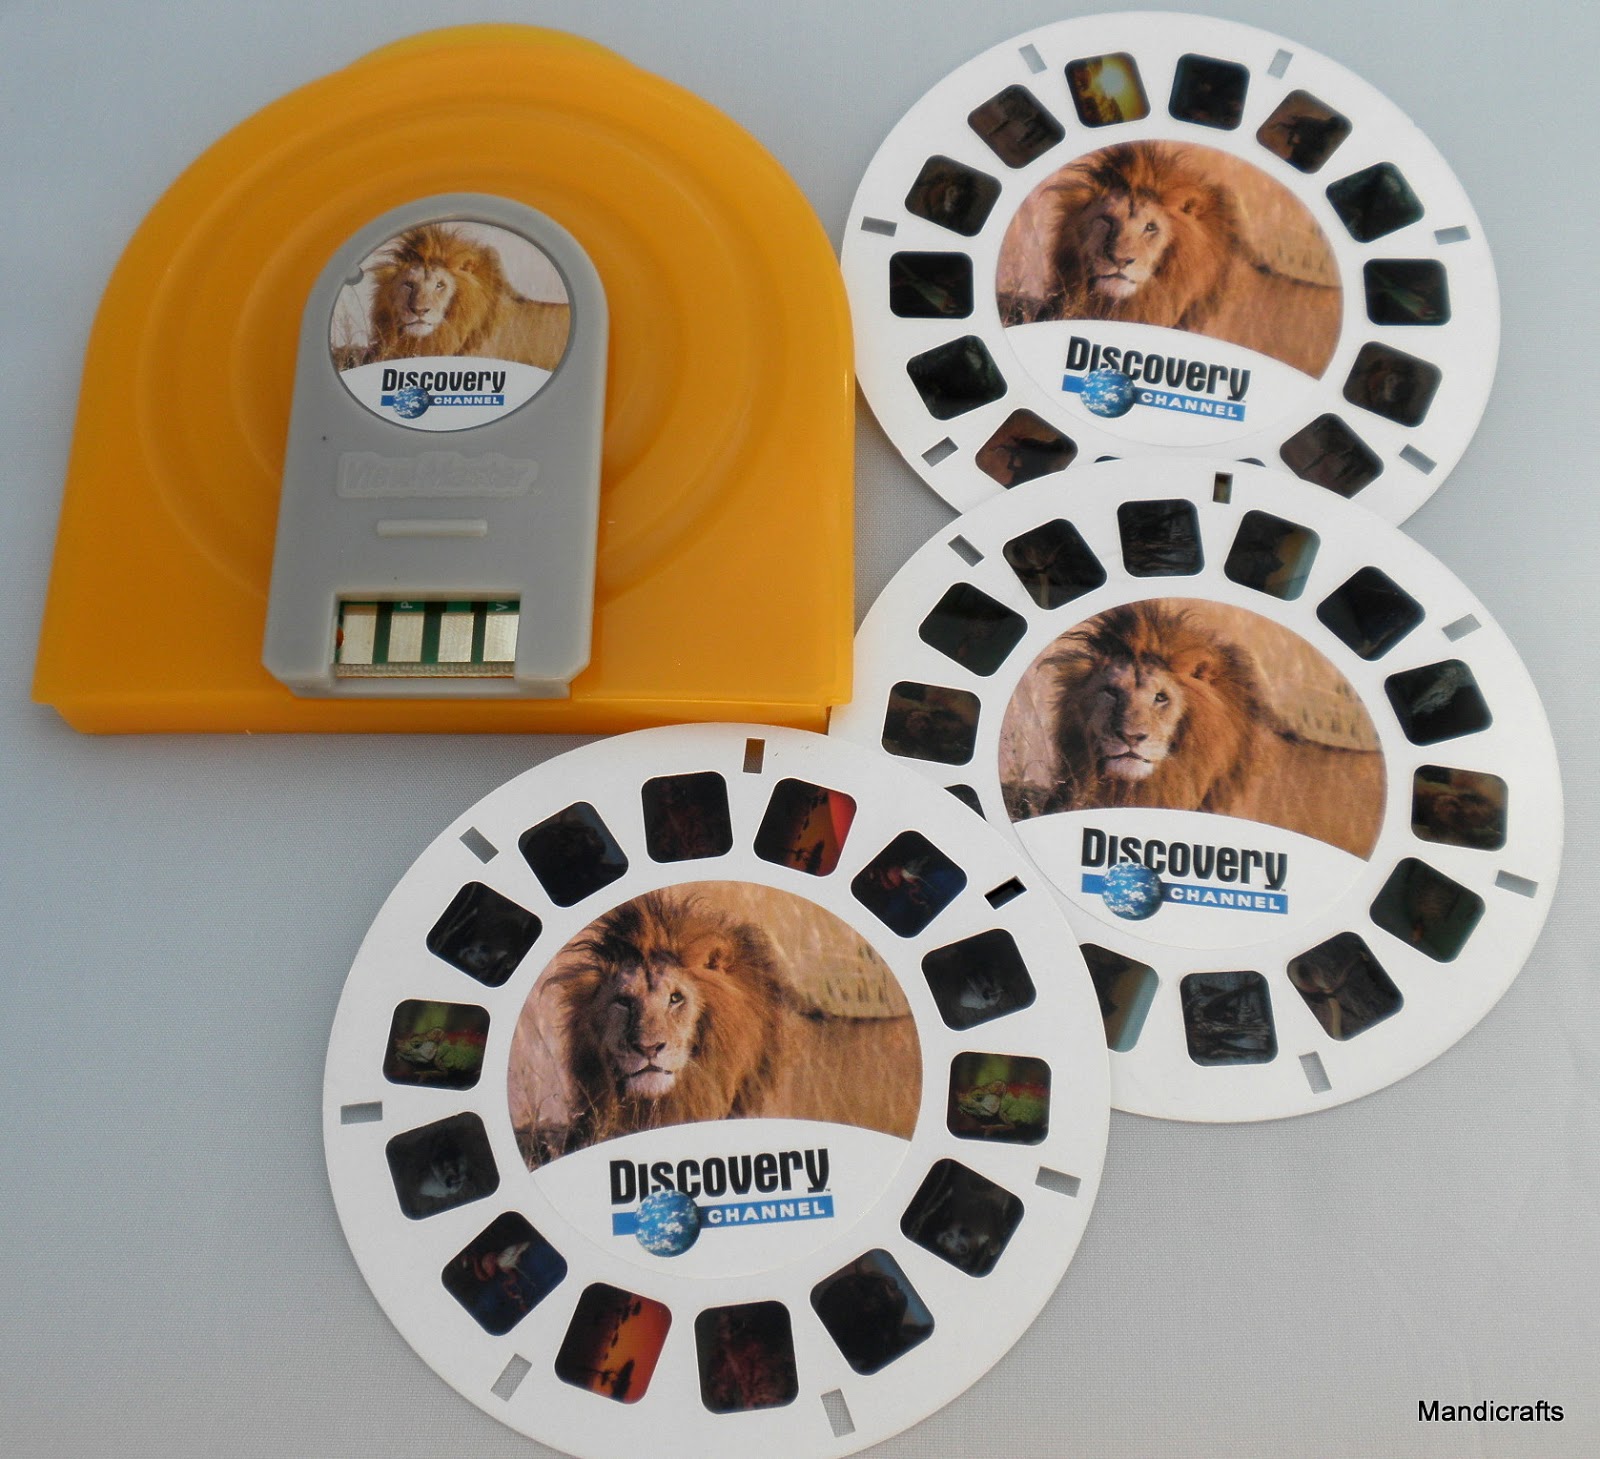 Mandicrafts News & Views - Teddy Bears & Collectibles: View-Master Stereo  Photograph Viewers & Reels - History of the Iconic 20th Century Toy